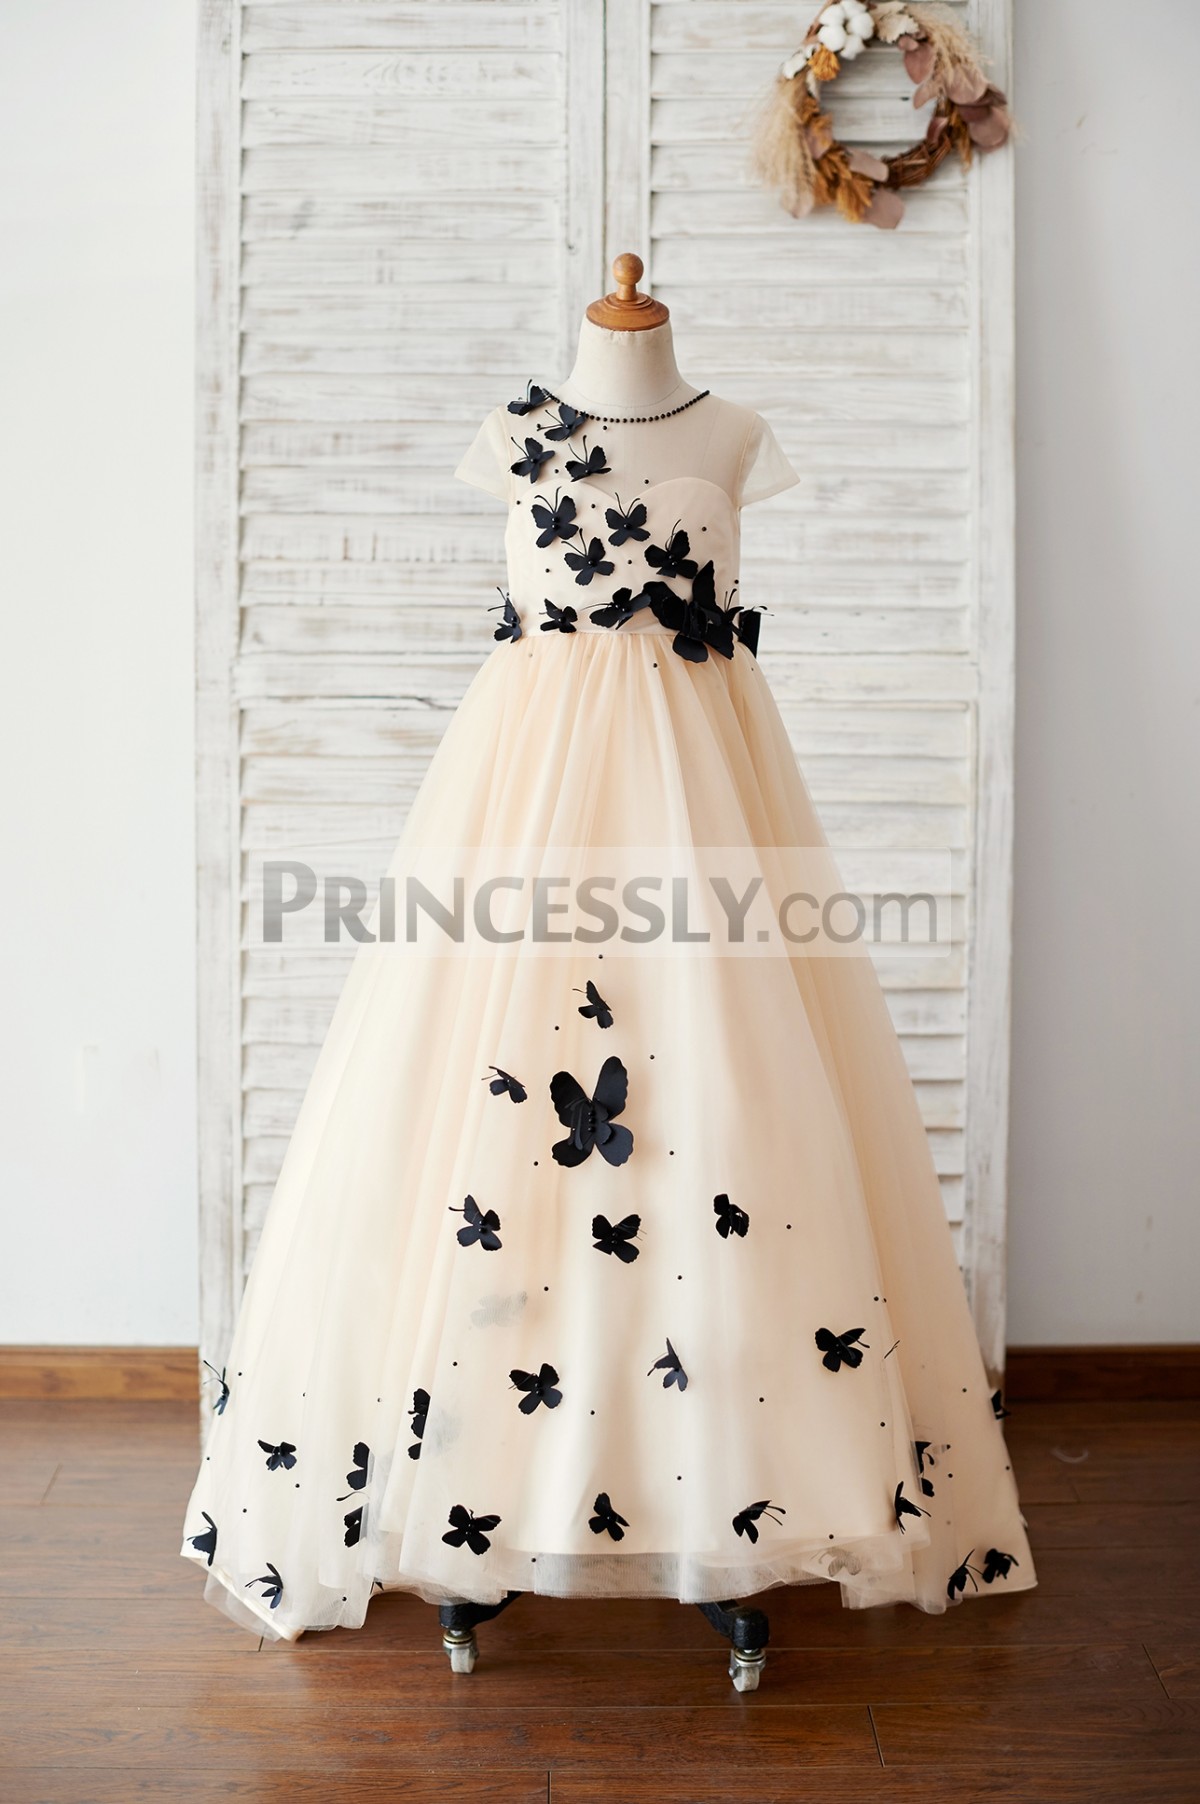 Princessly.com-K1003884-Champagne Tulle Cap Sleeves Wedding Flower Girl Dress with Black Butterflies-31